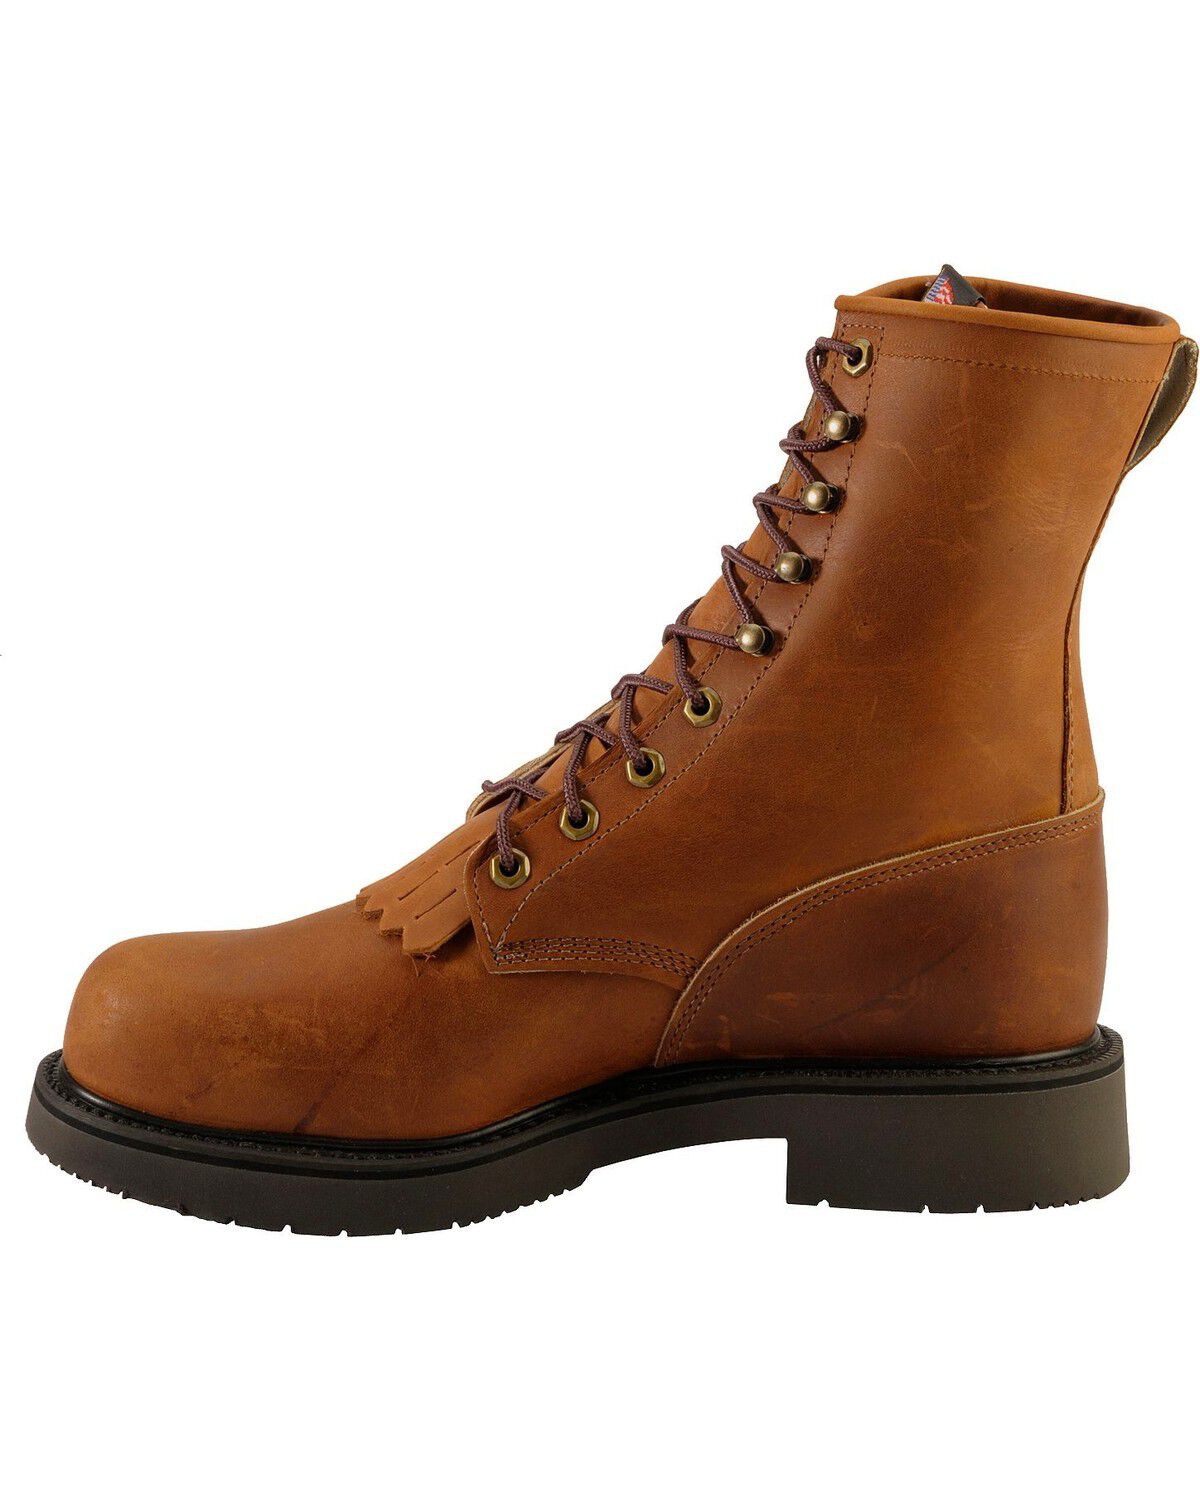 justin men's double comfort lacer work boots